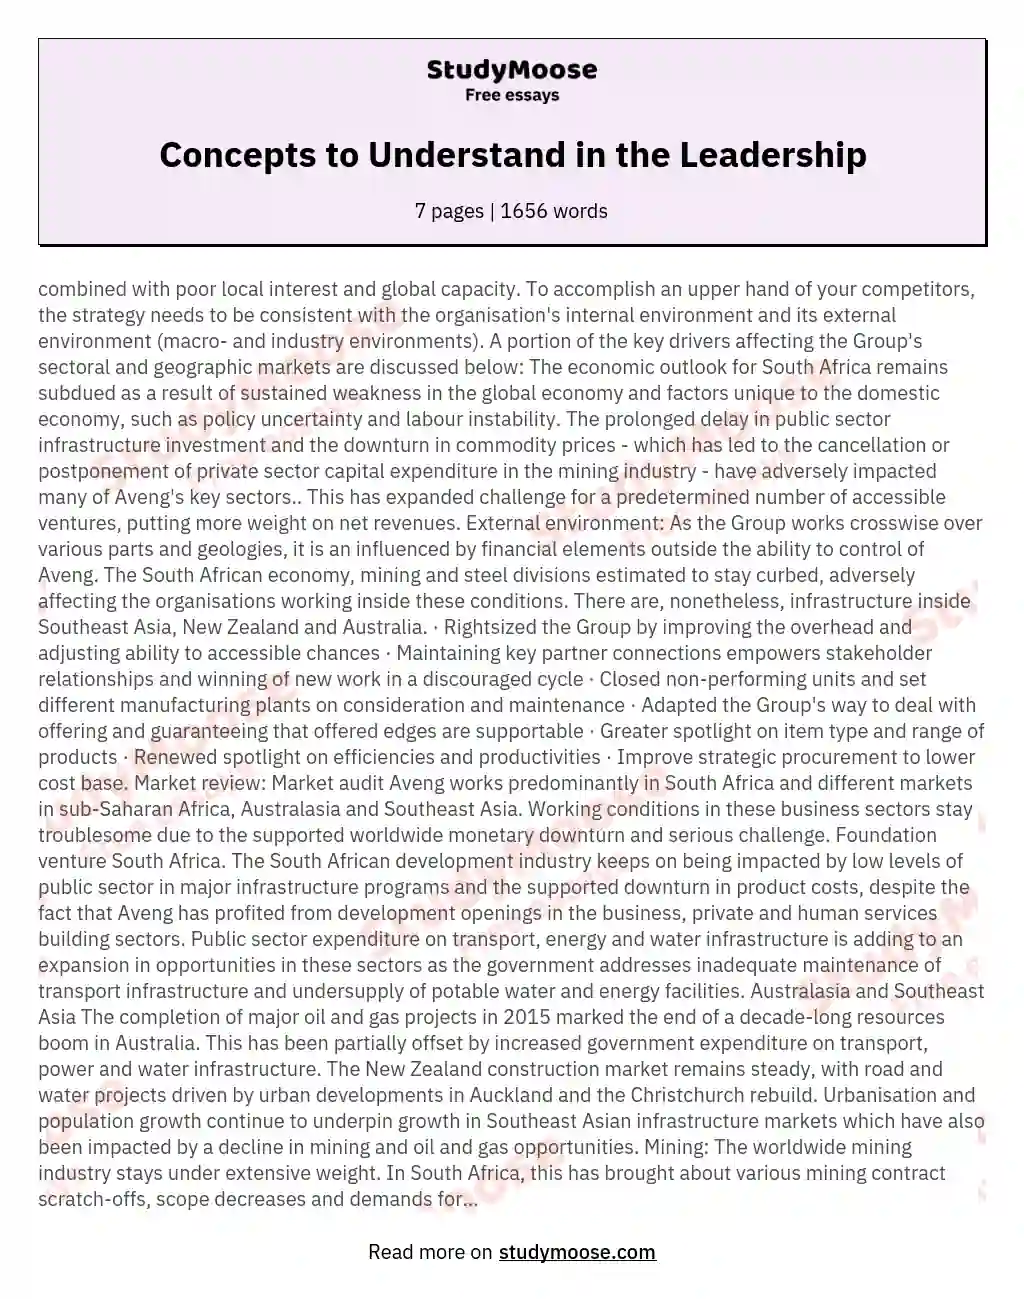 Concepts to Understand in the Leadership essay